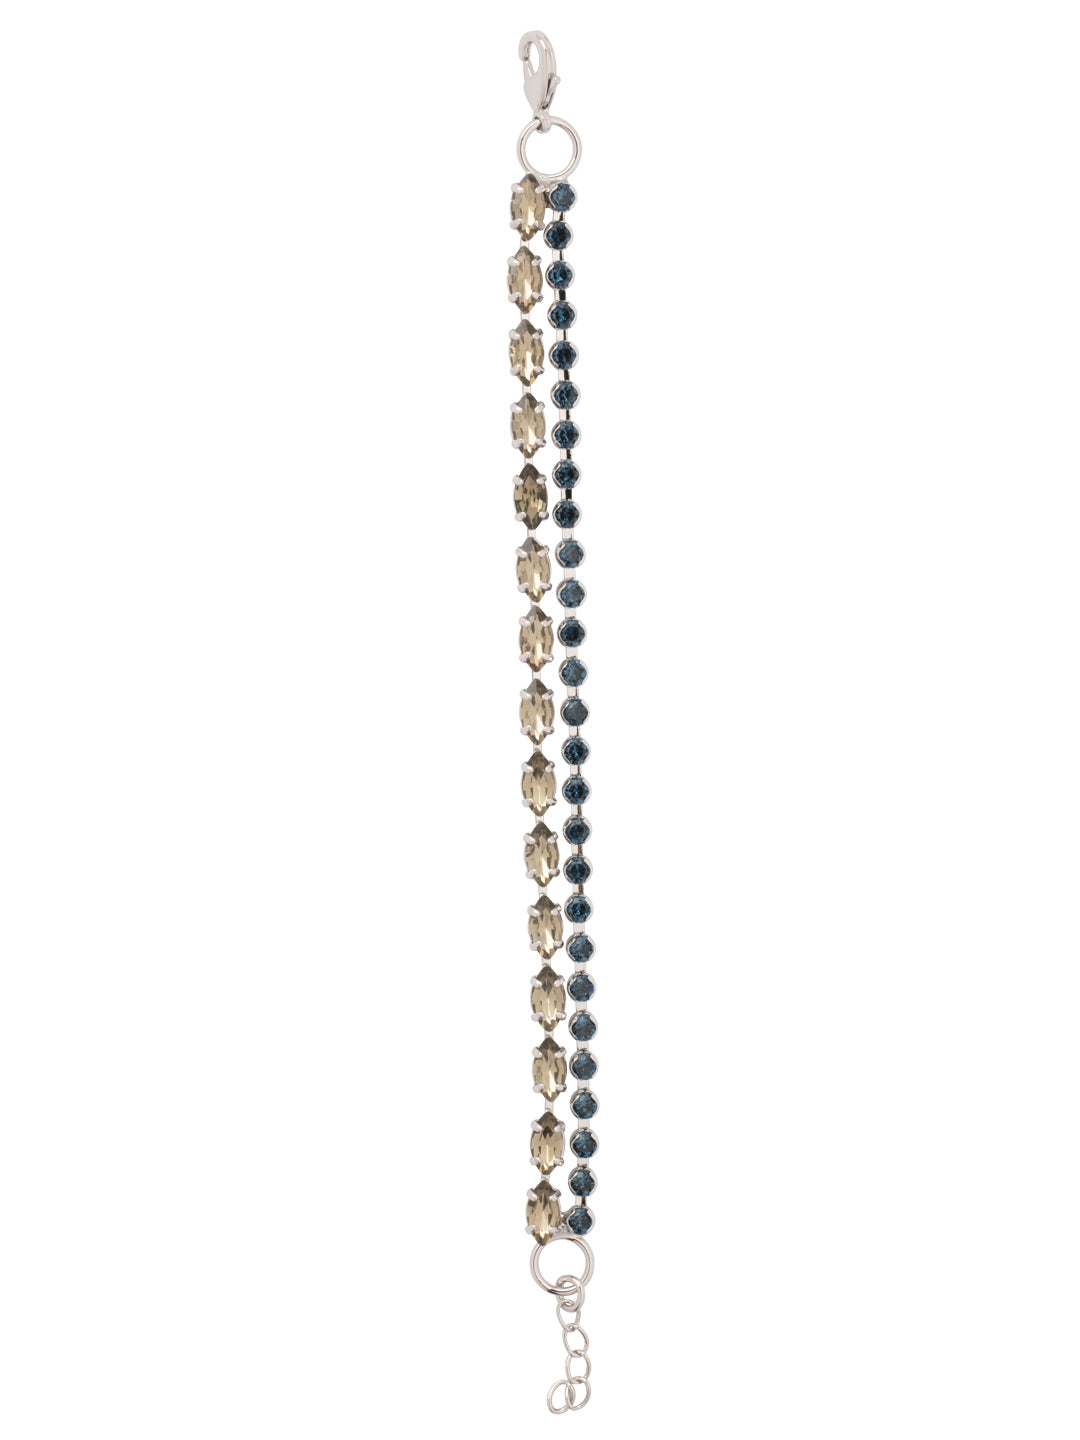 Clarissa Layered Tennis Bracelet - BFL6PDASP - <p>The Clarissa Layered Tennis Bracelet features a rhinestone chain and navette crystal chain layered on an adjustable chain, secured with a lobster claw clasp. From Sorrelli's Aspen SKY collection in our Palladium finish.</p>